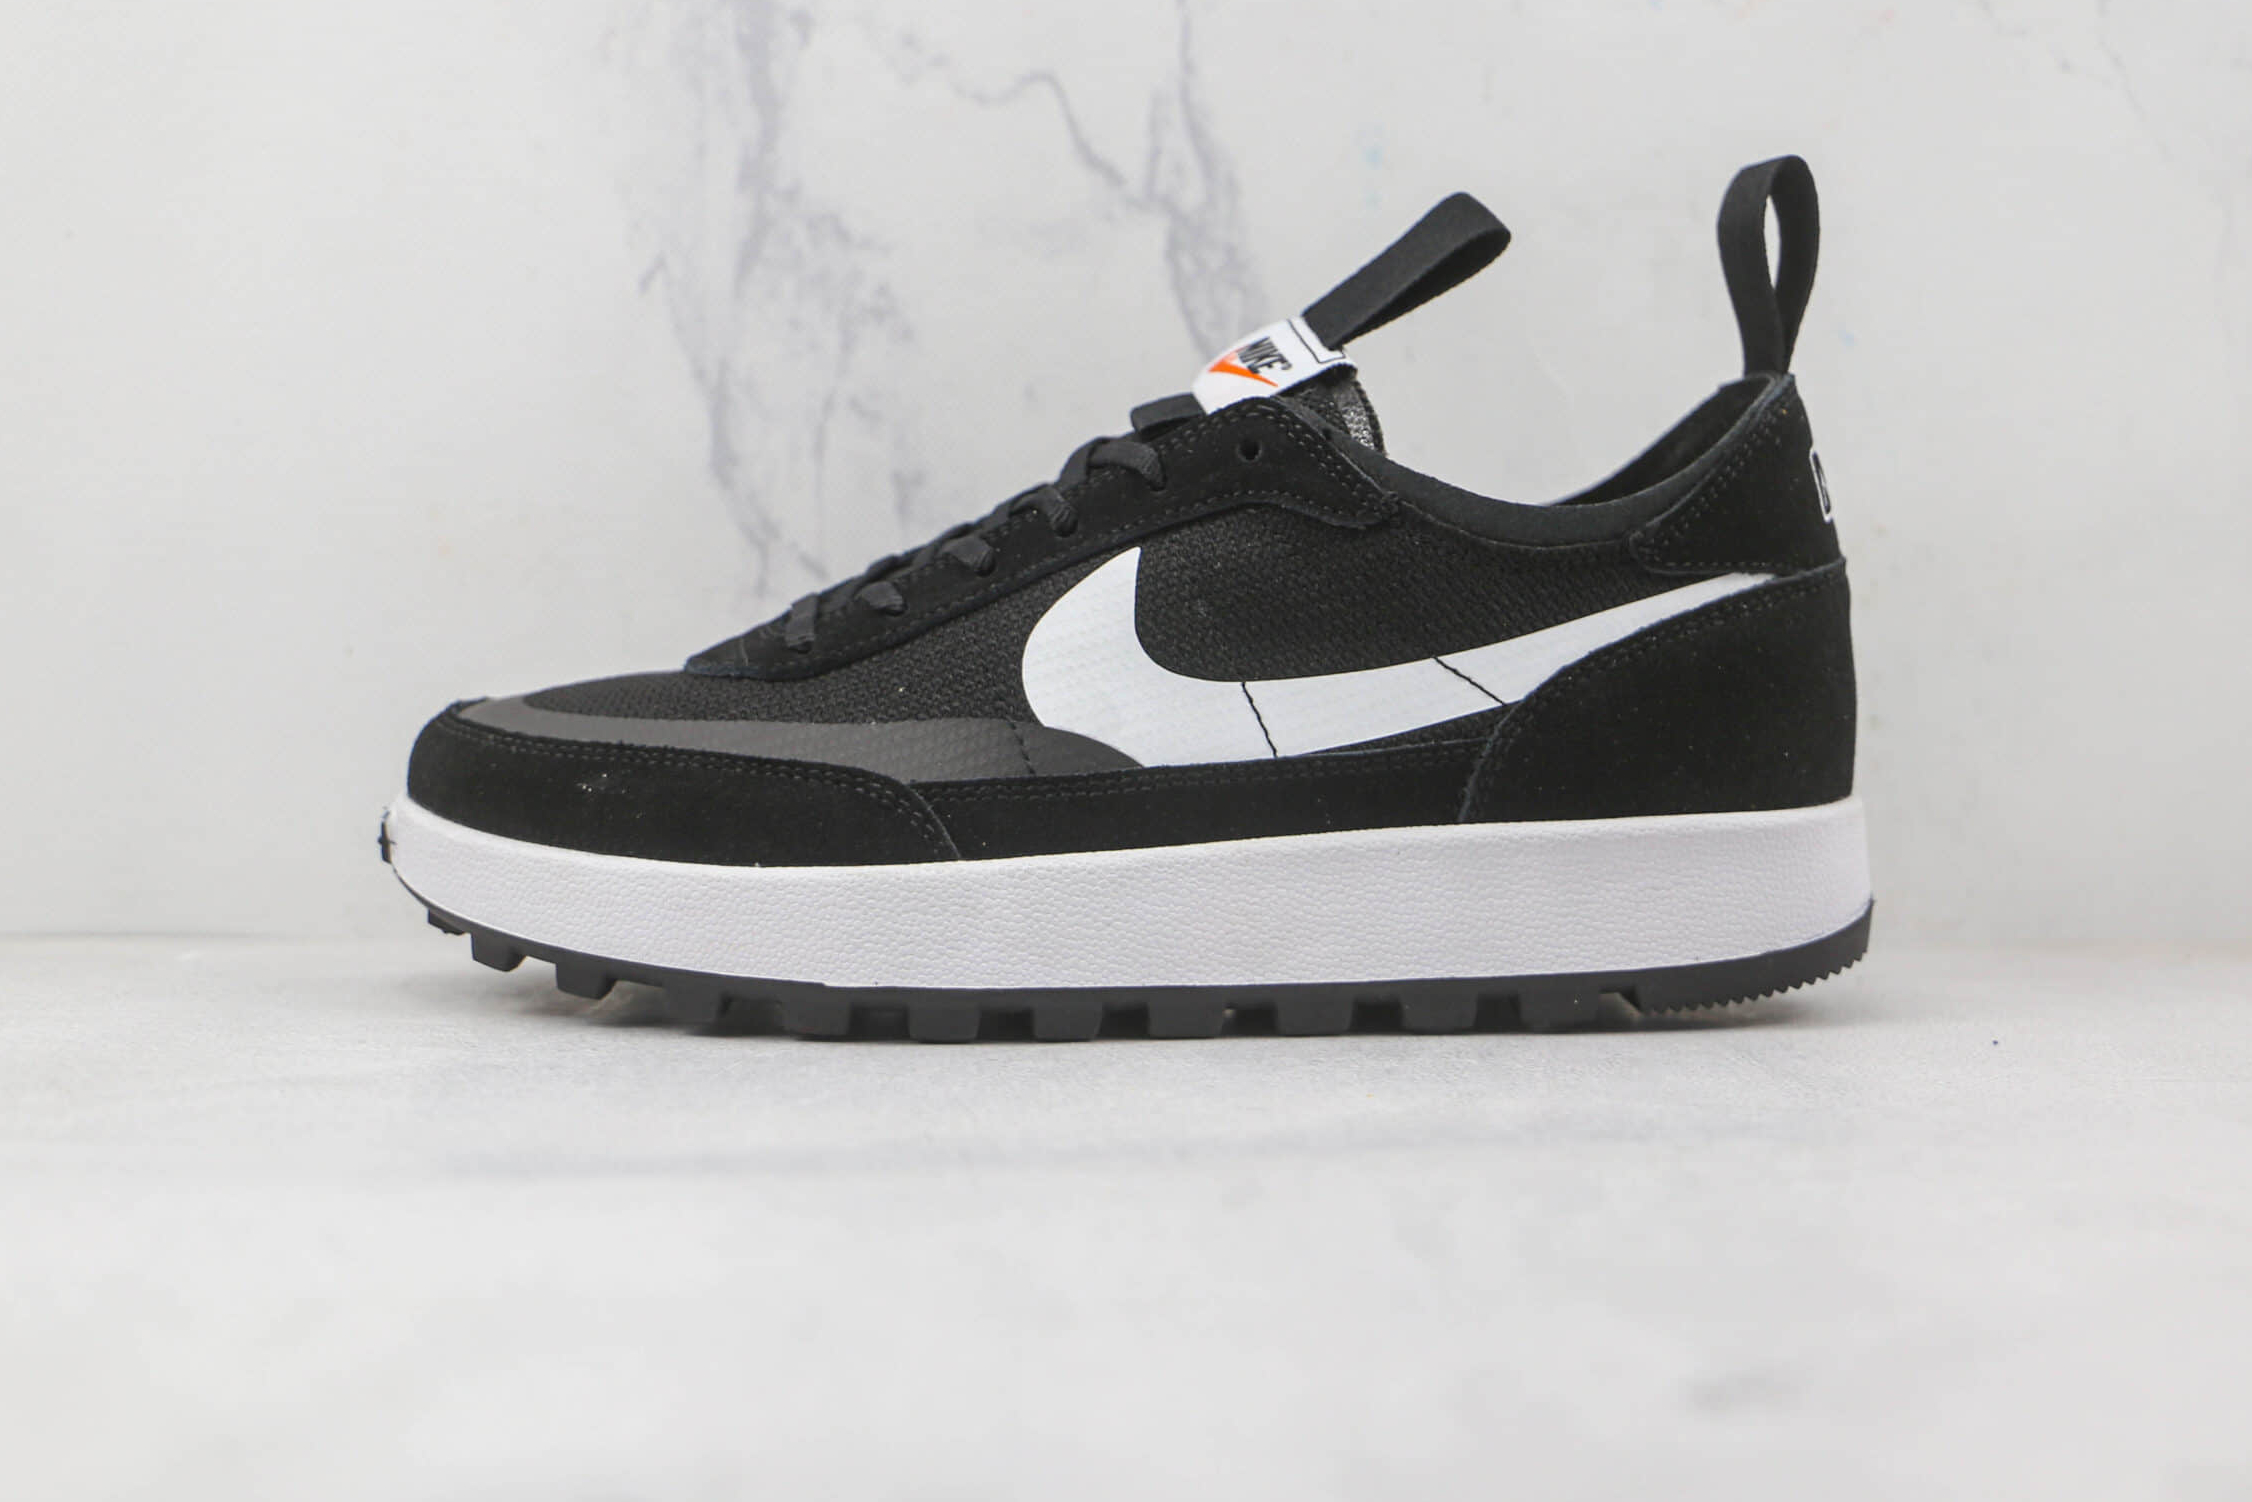 Tom Sachs x NikeCraft General Purpose Shoe Black White DA6672-500 | Limited Edition Collaboration | Top Quality Construction | Free Shipping